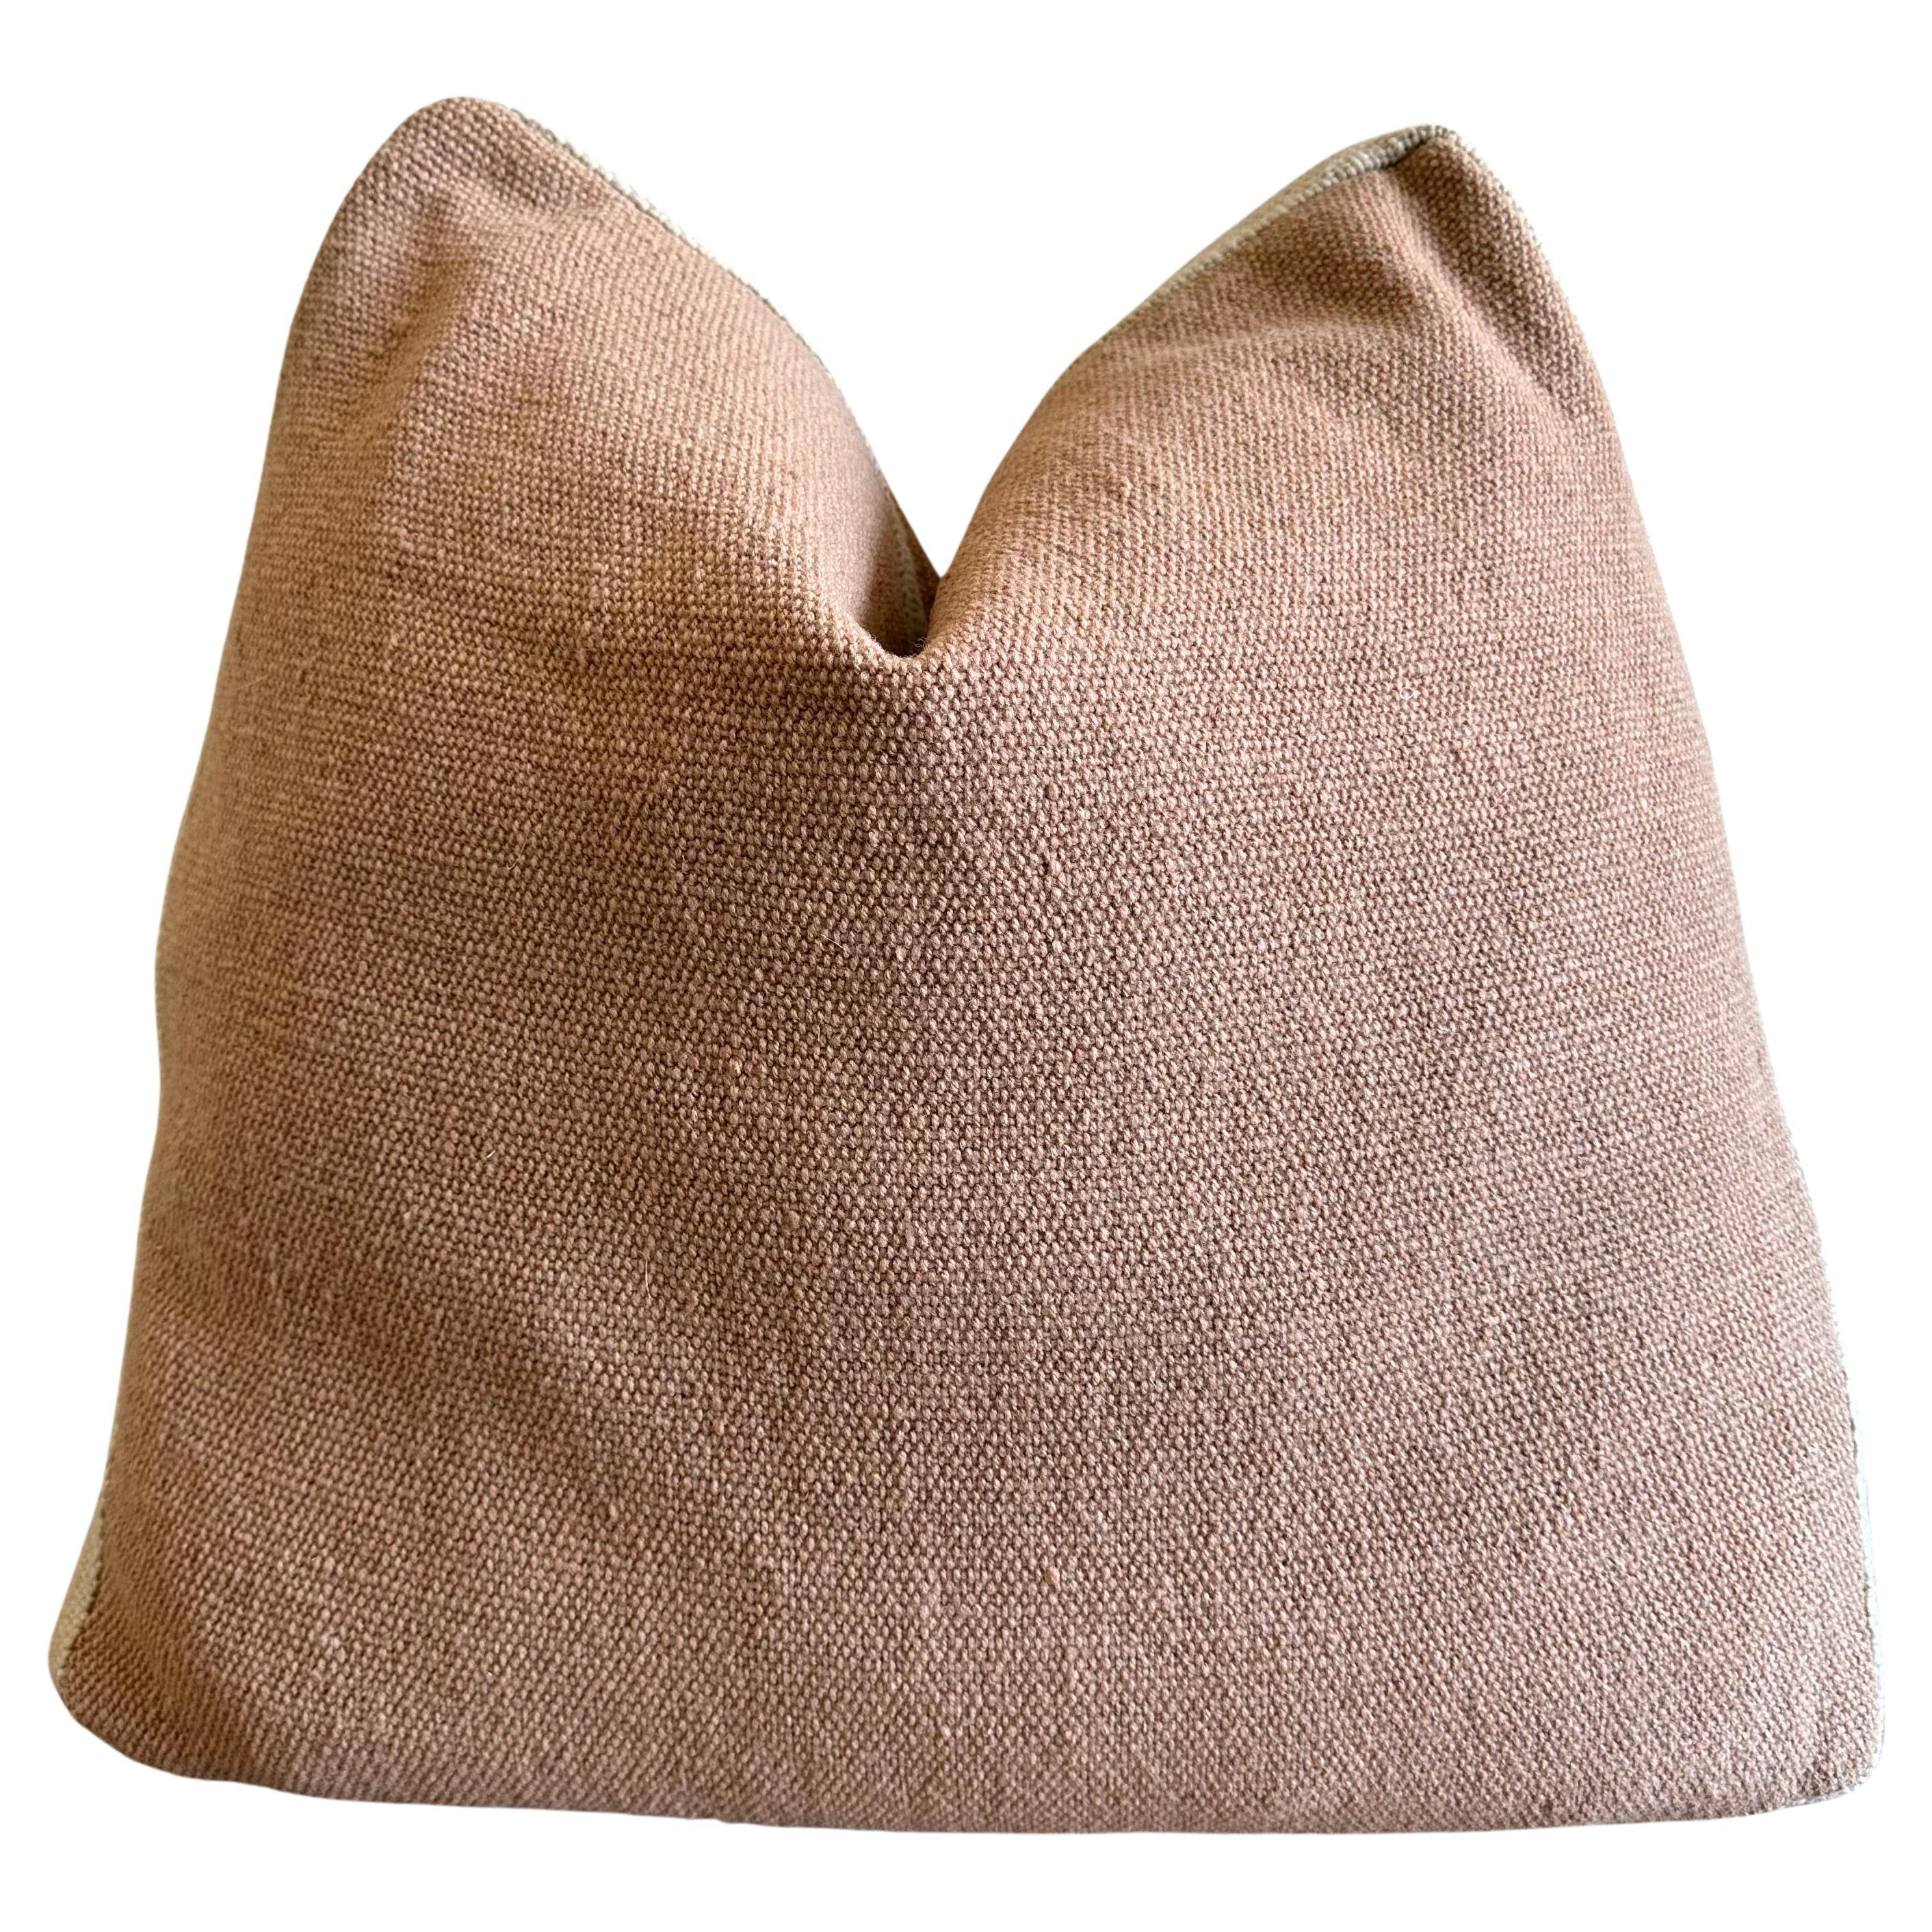 Custom Thick Woven Wool Box Pillow in Blush Nude and Oatmeal